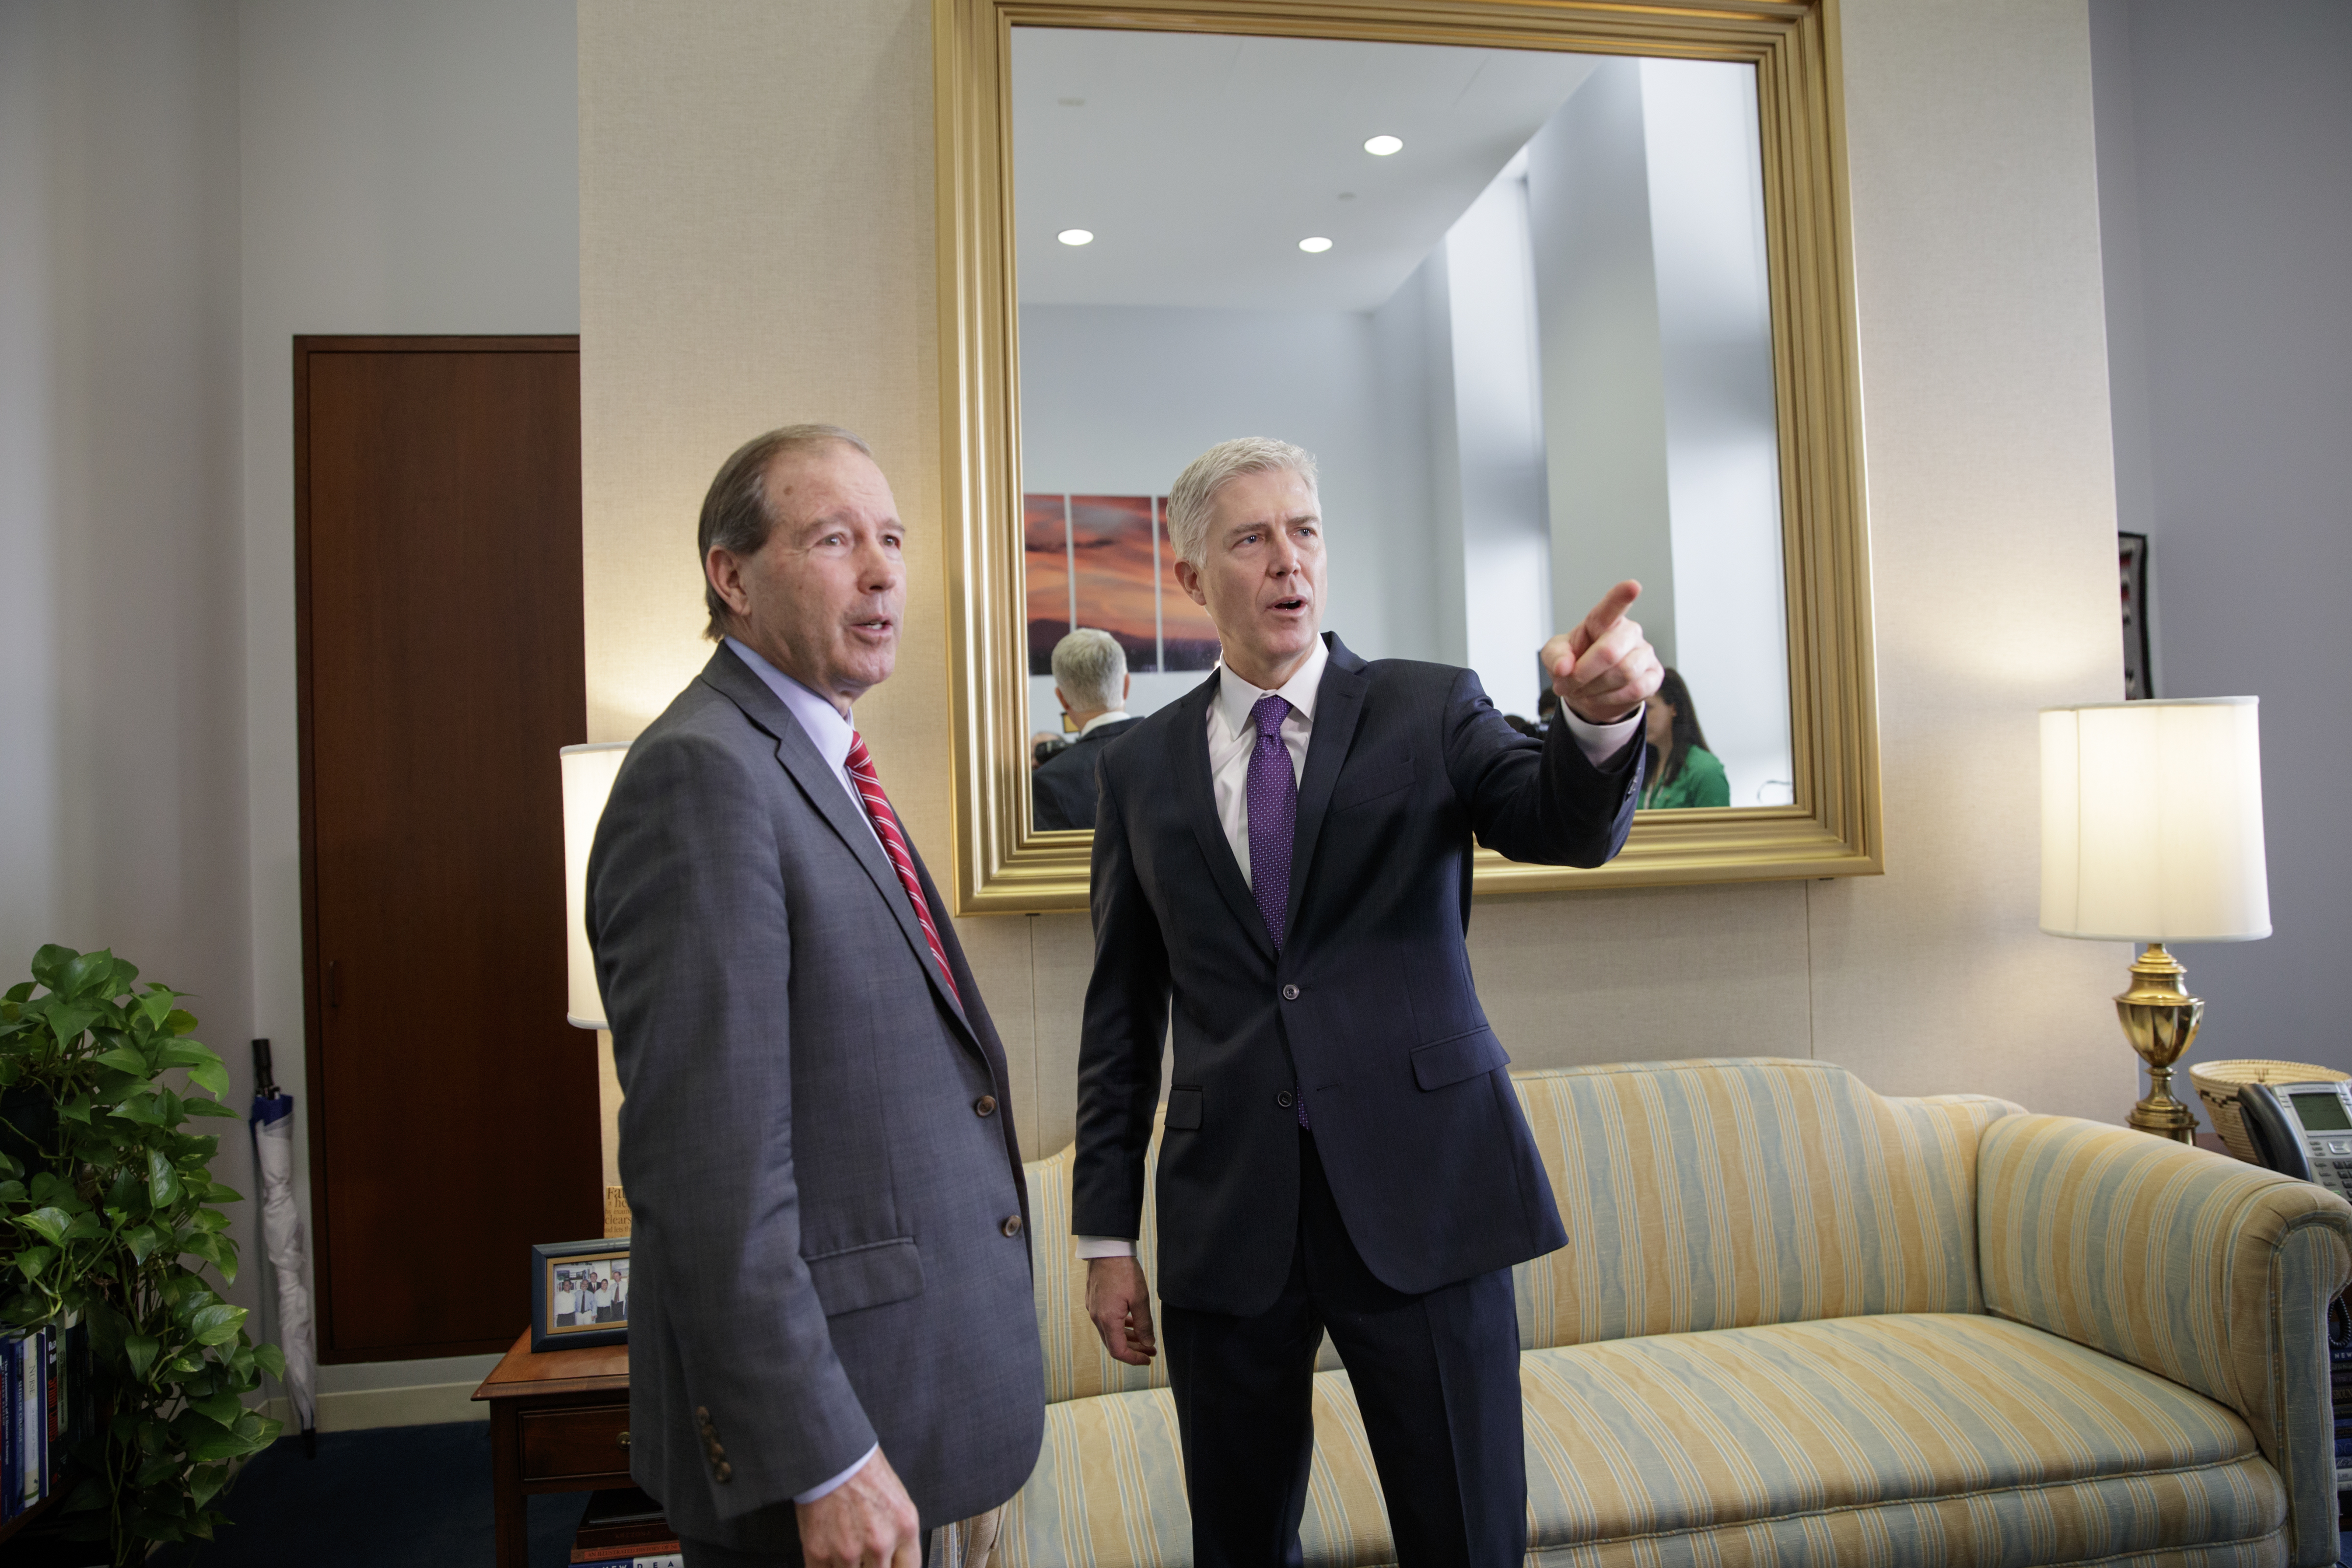 Supreme Court Justice nominee Judge Neil Gorsuch, right, meets with Sen. Tom Udall, D-N.M. on Capitol Hill in Washington, Feb. 27, 2017.